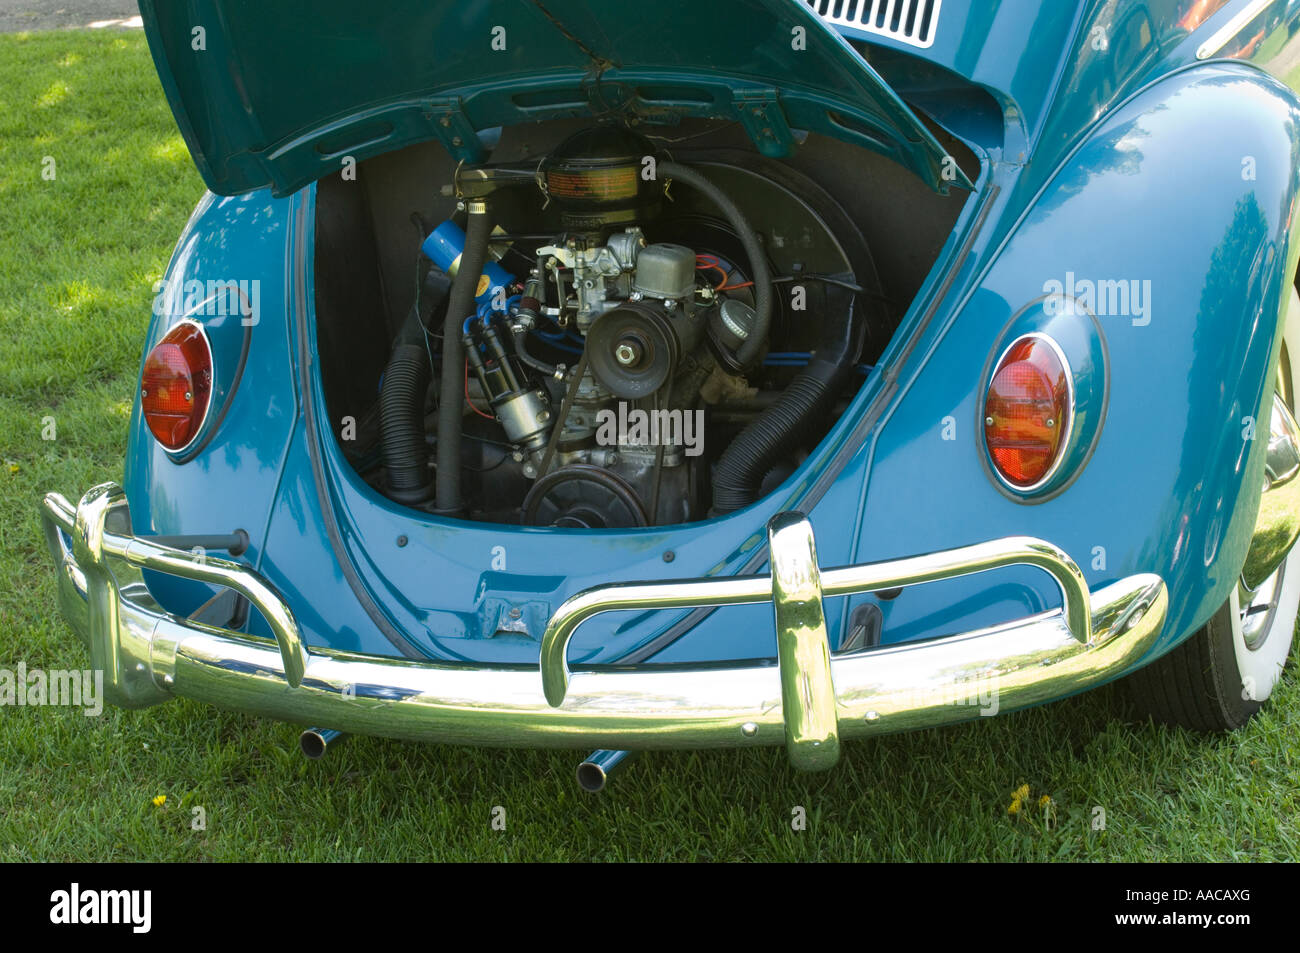 Vintage Volkswagen Beetle with engine visible Stock Photo